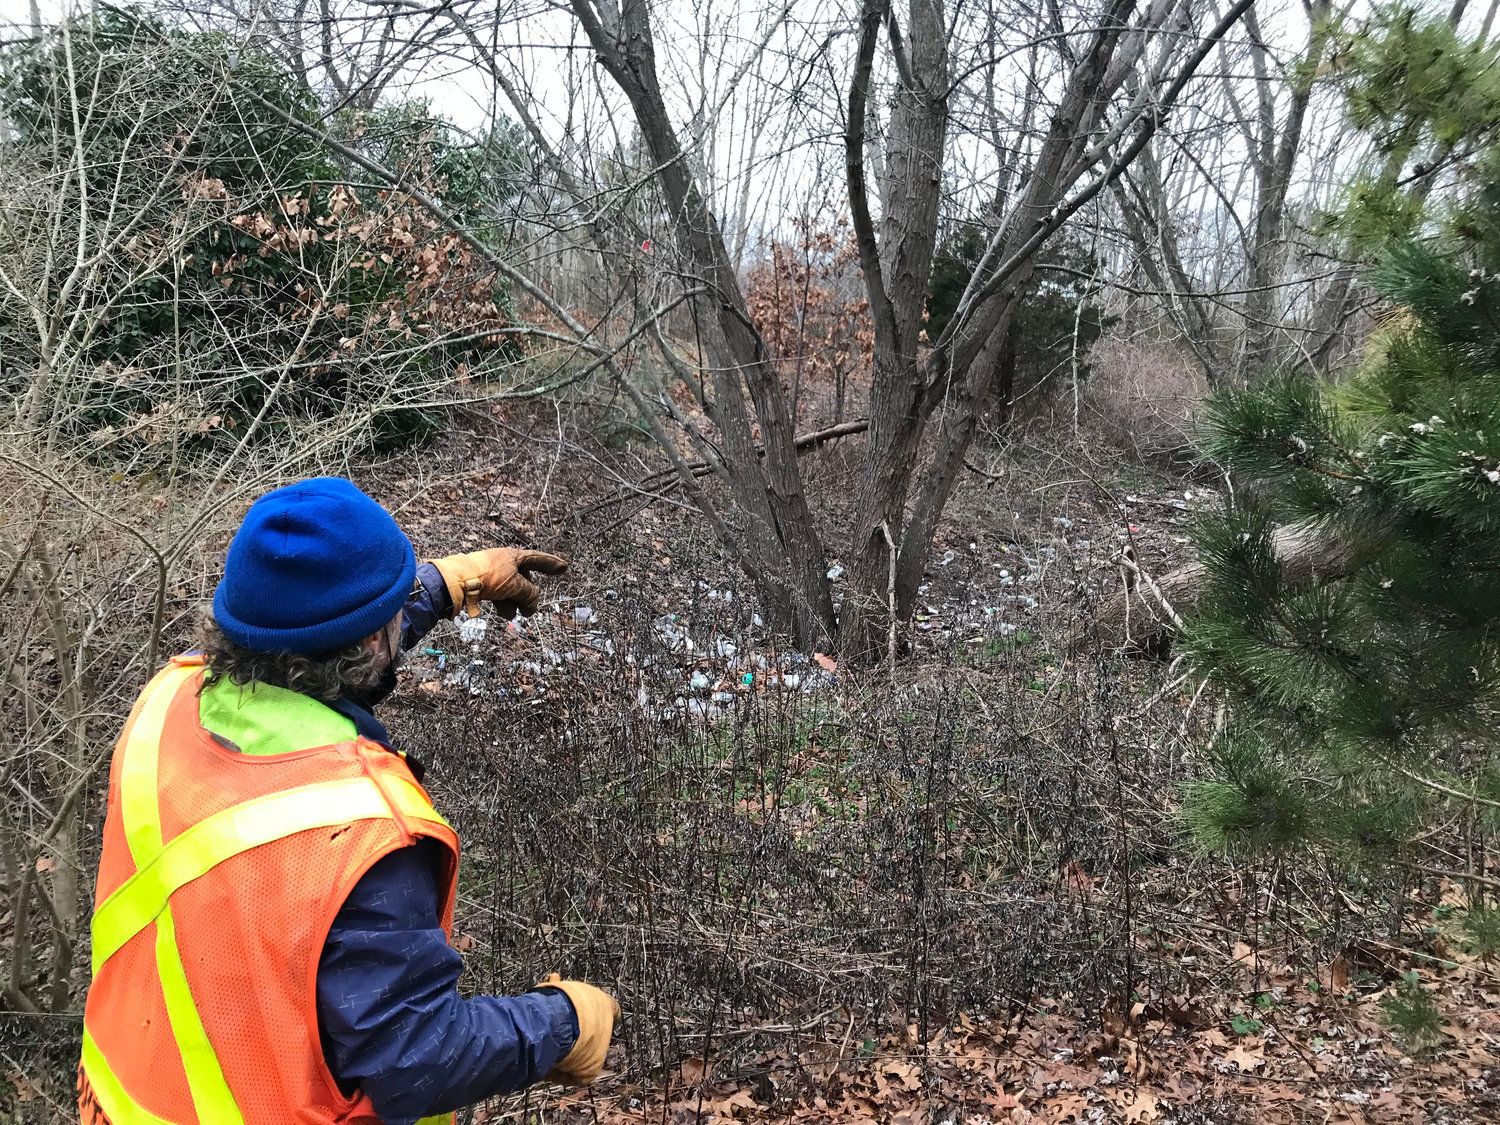 Longtime Keep Islip Clean volunteer William Raftery, of East Islip, said he discovered the litter accumulation roughly two years ago. He estimates there’s over 10 years’ worth of litter in the area.